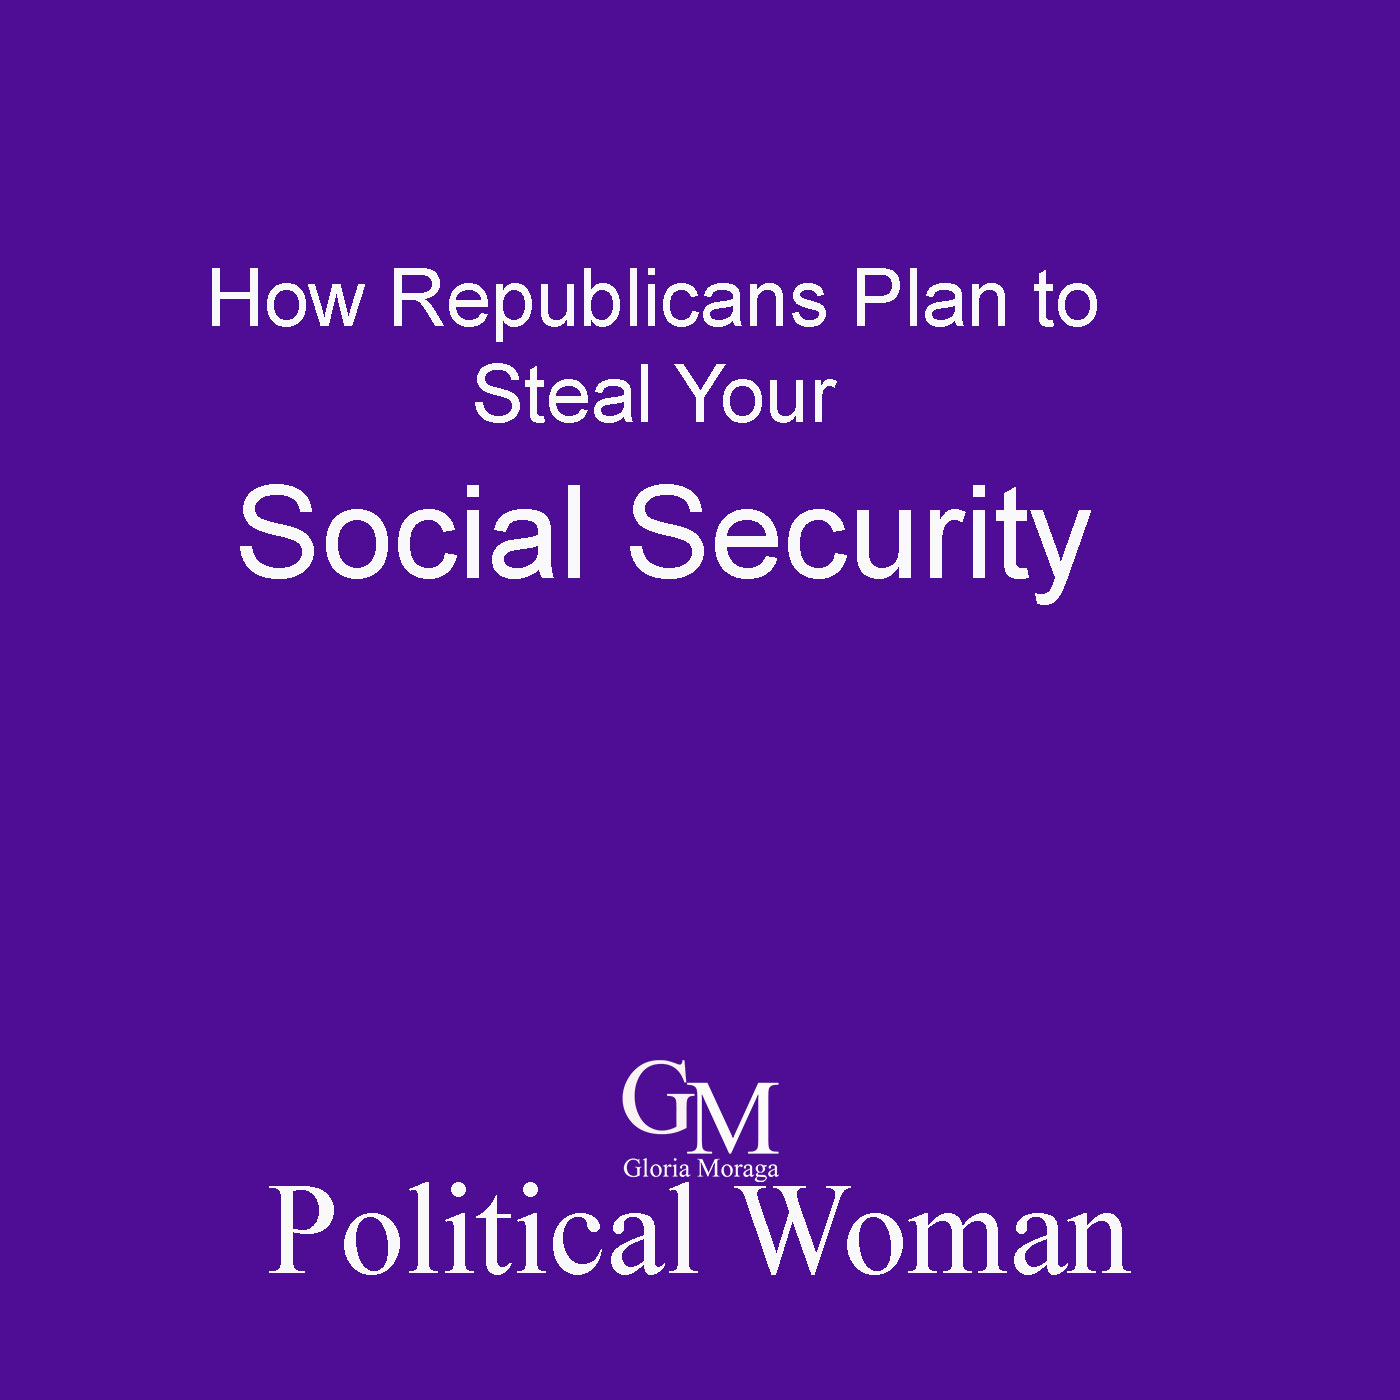 How Republicans Plan to Steal Your Social Security